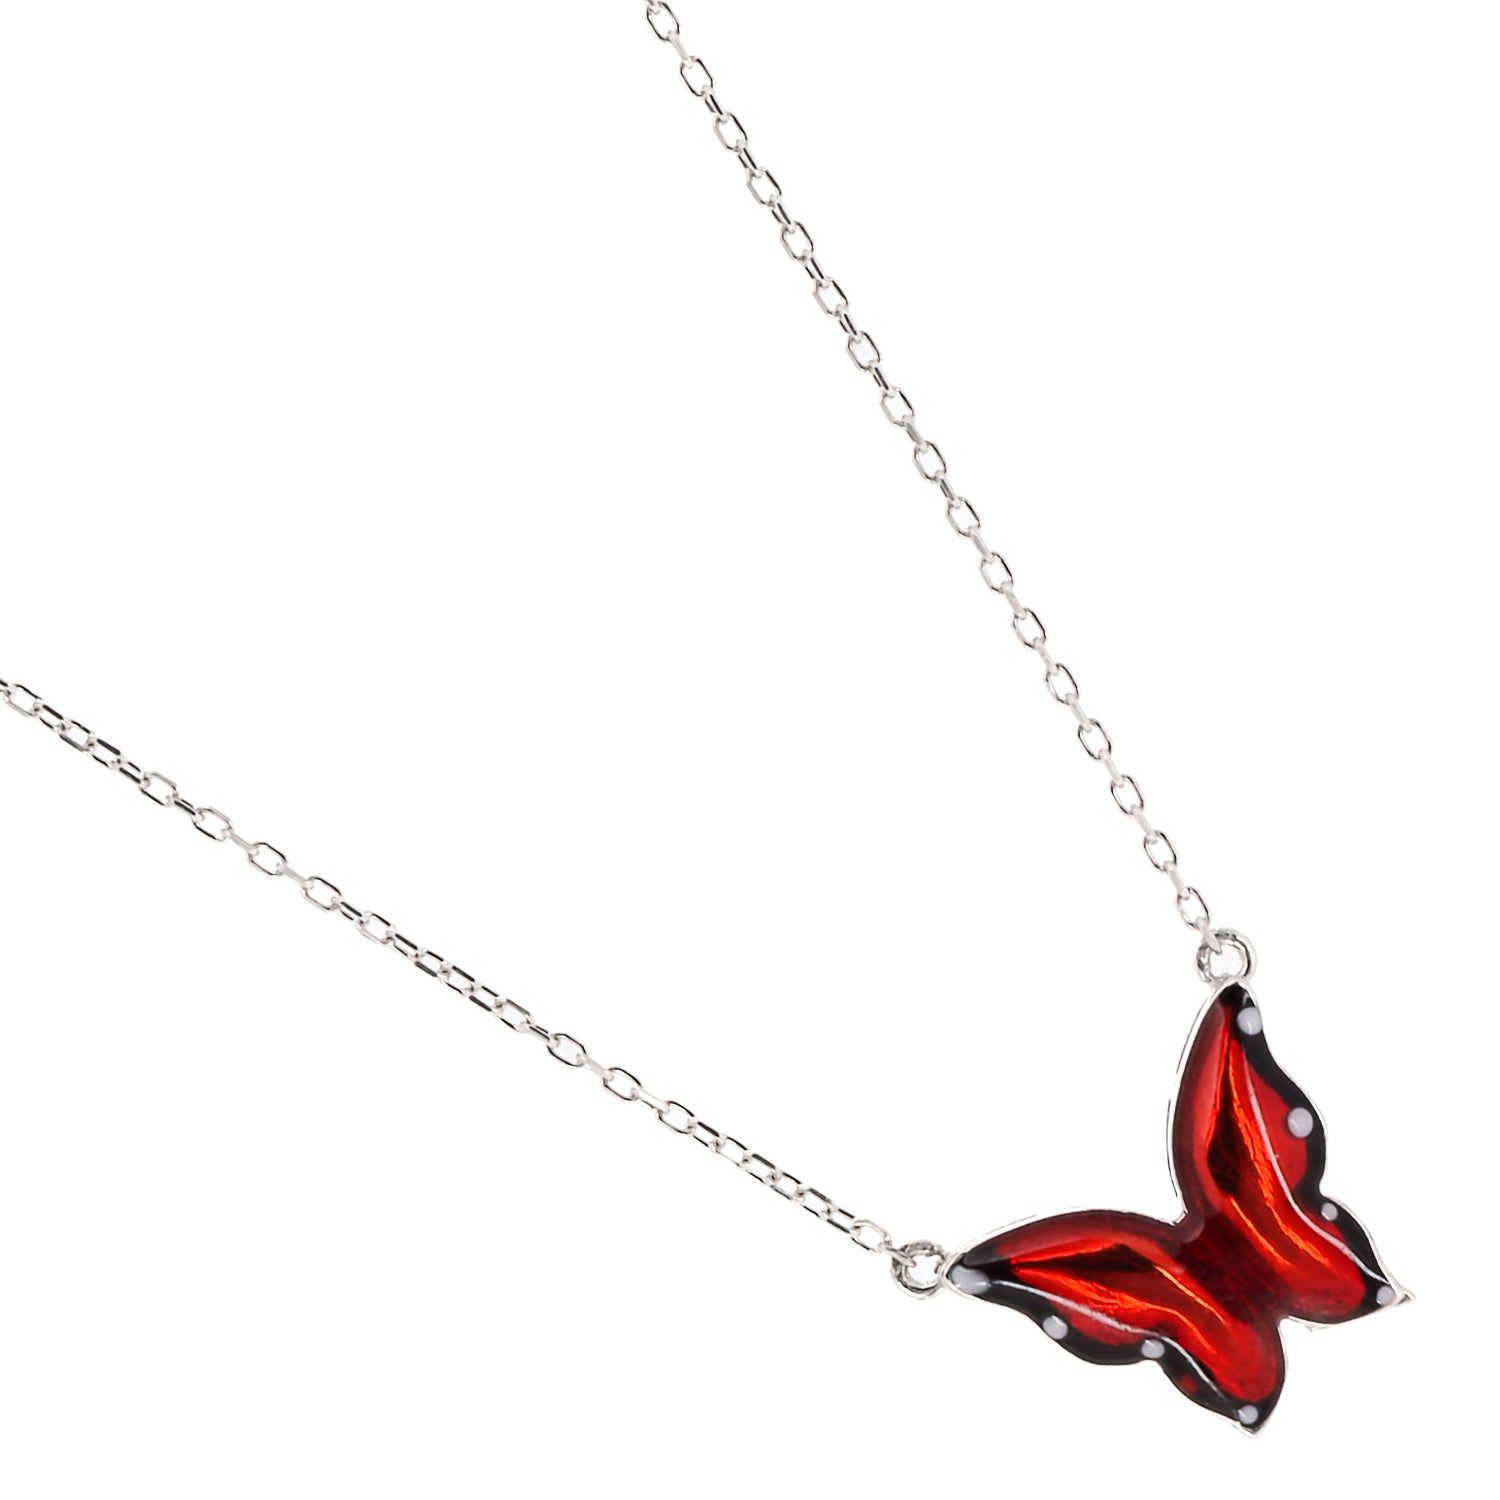 Stylish shot of the Silver Joy Red Enamel Butterfly Necklace, adding a touch of spirituality and elegance to any outfit.